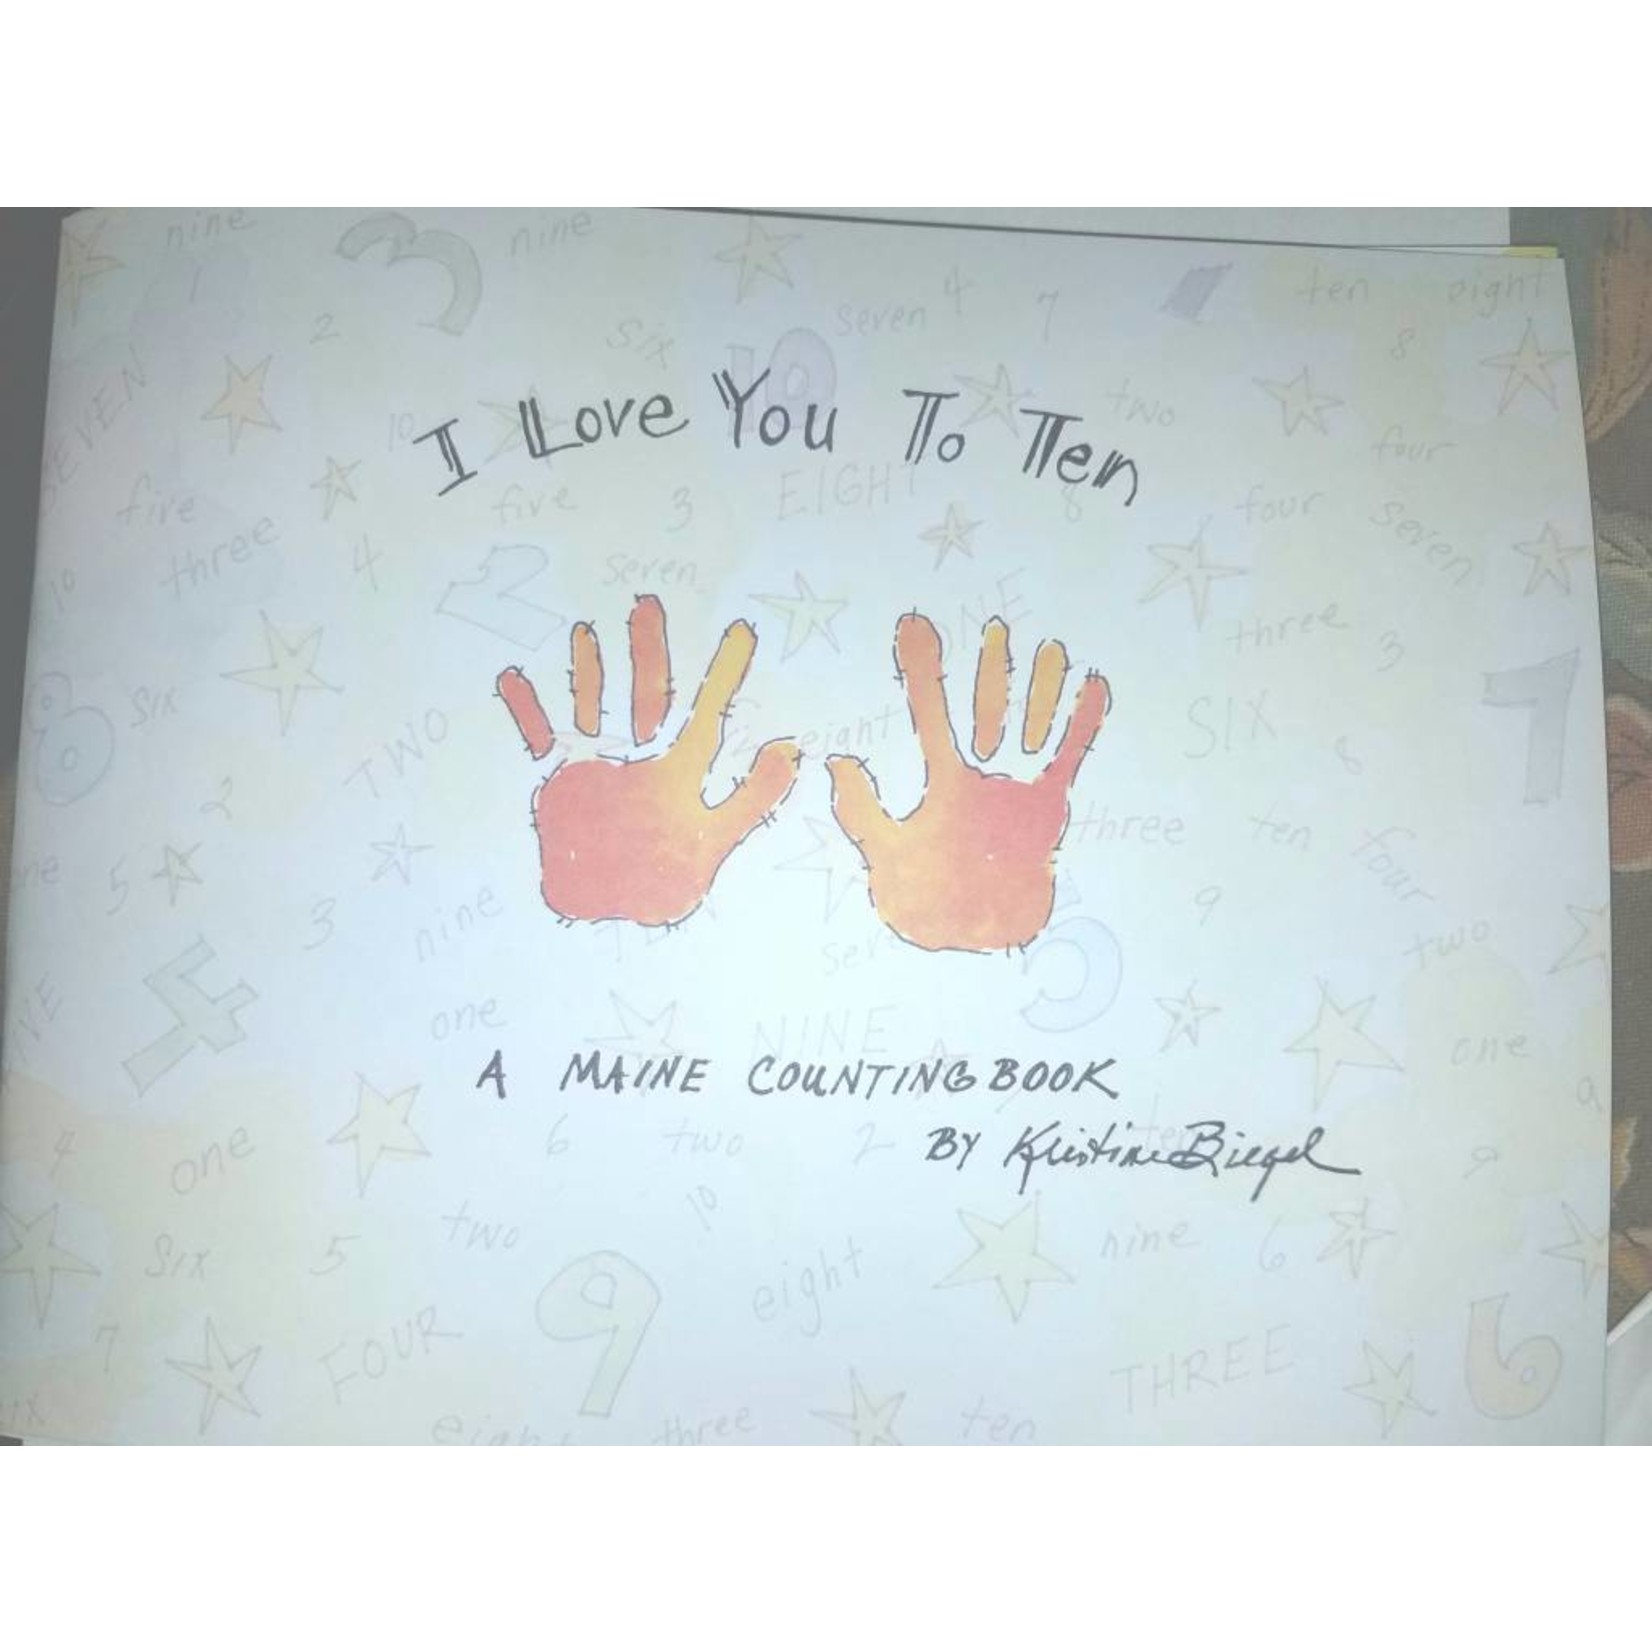 I Love You To Ten (A Maine Counting Book)